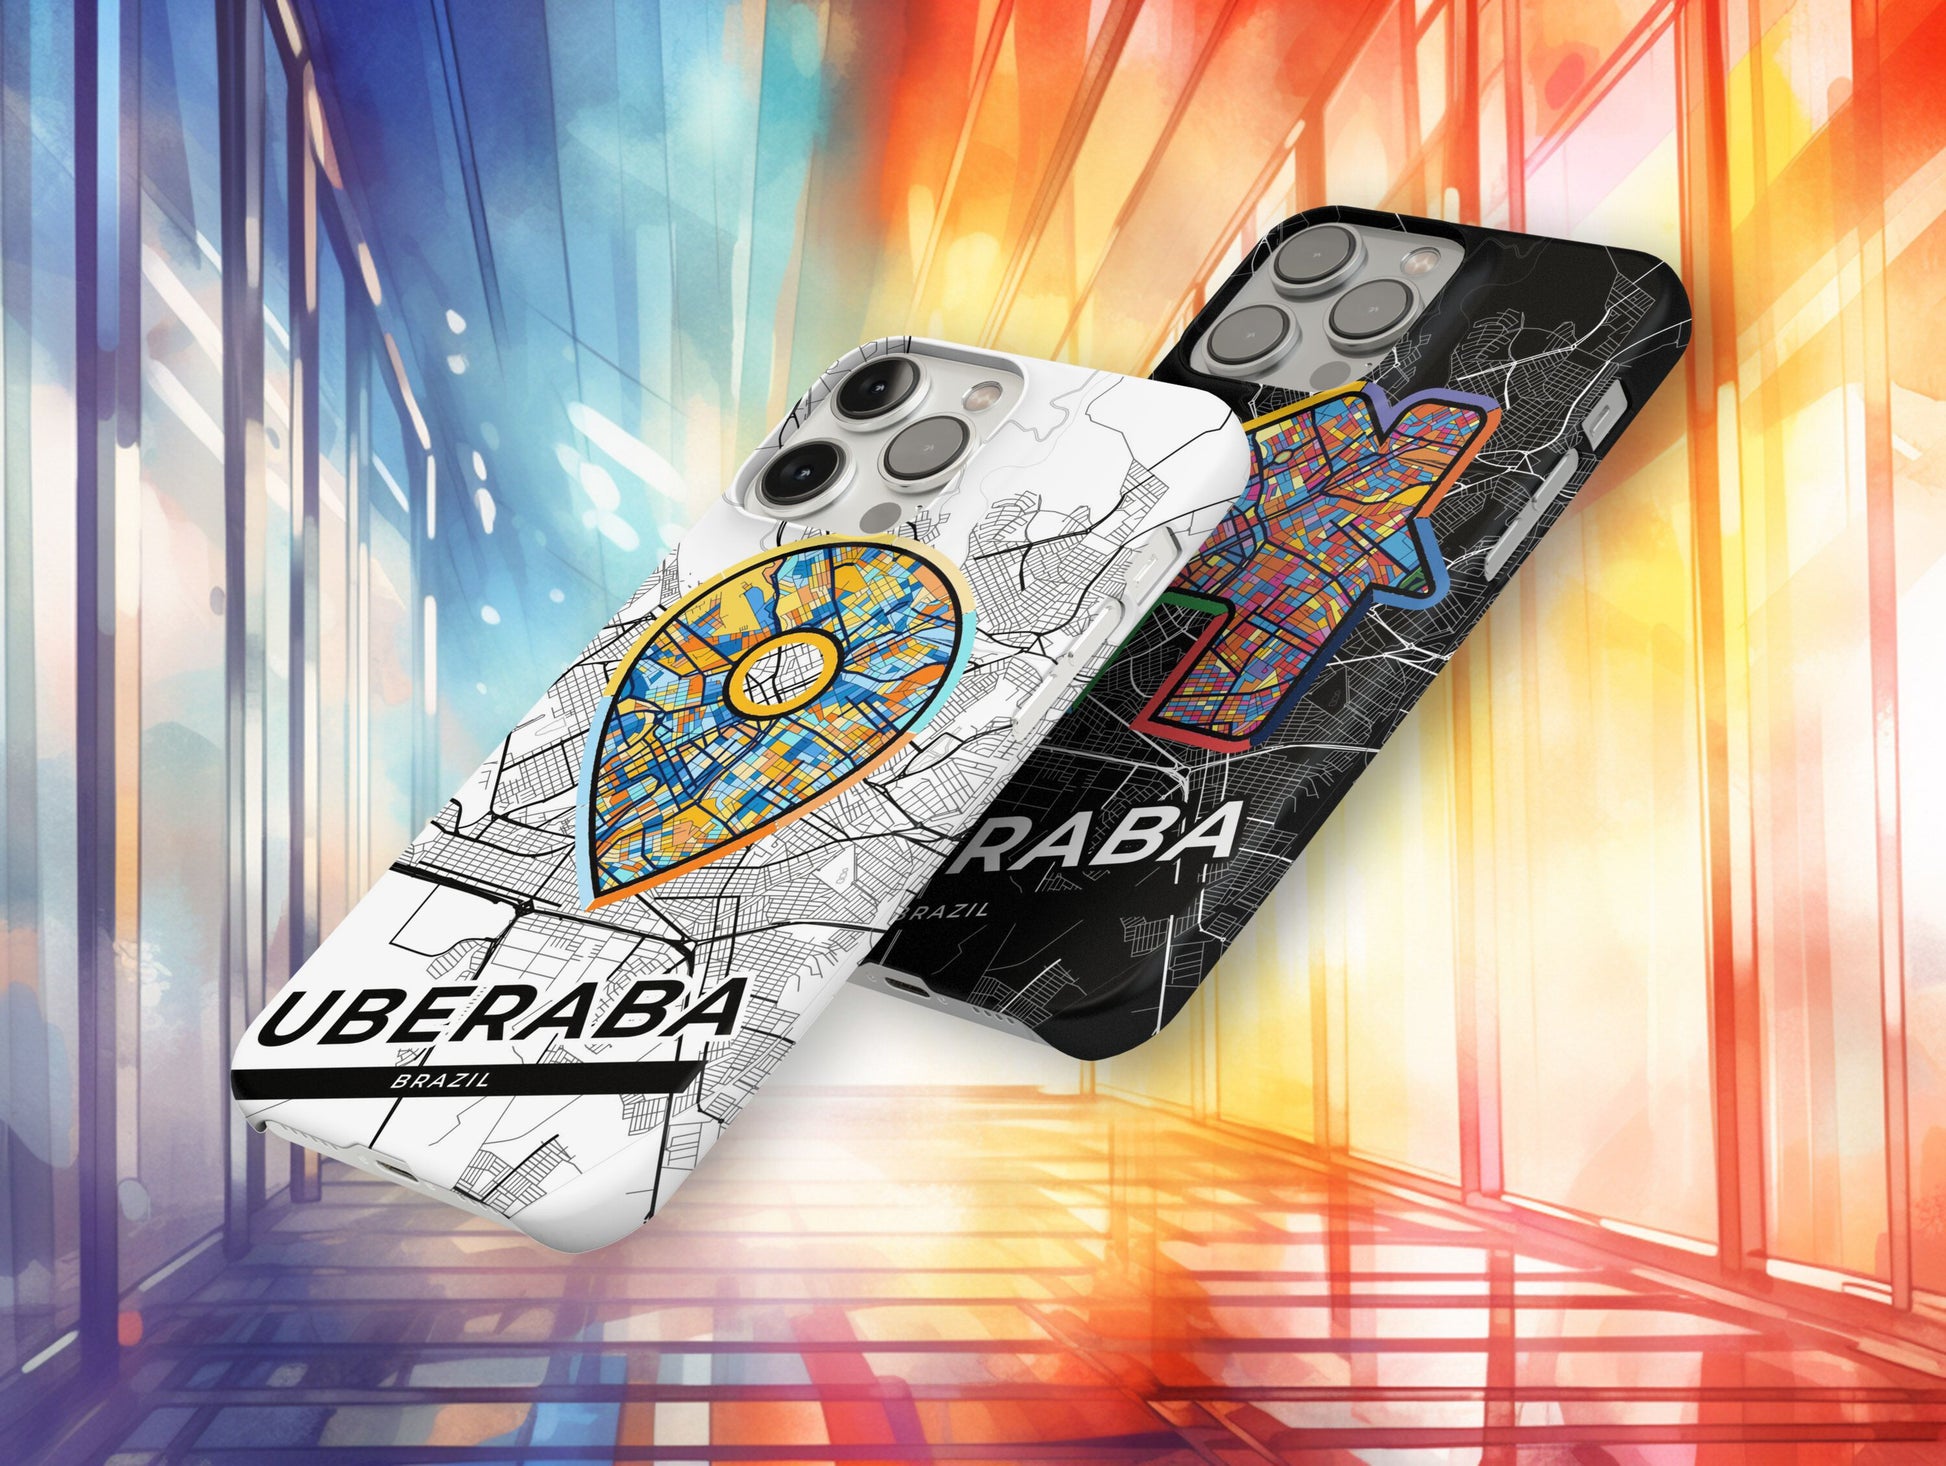 Uberaba Brazil slim phone case with colorful icon. Birthday, wedding or housewarming gift. Couple match cases.